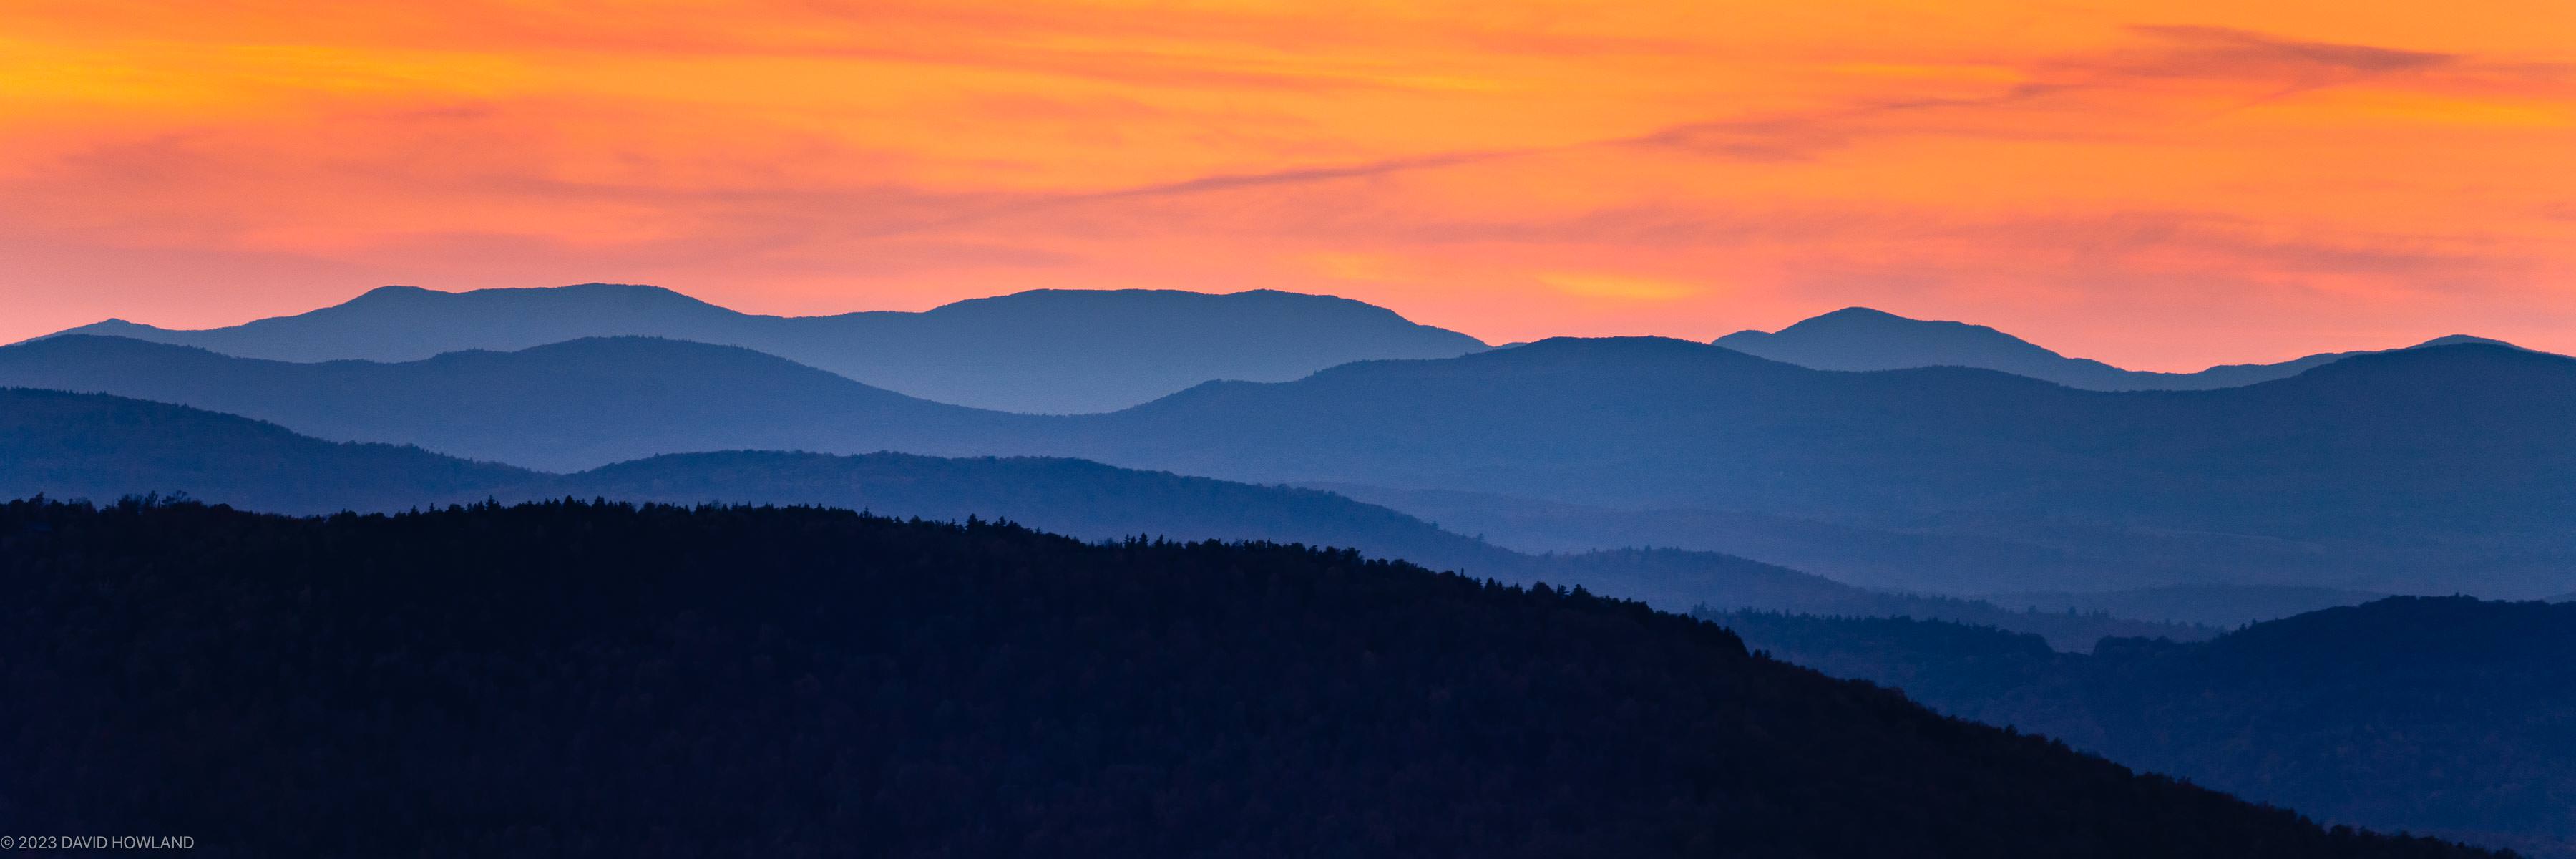 A colorful panorama photo of an orange sunset behind the layered blue-hued ridges of the Green Mountains of Vermont.